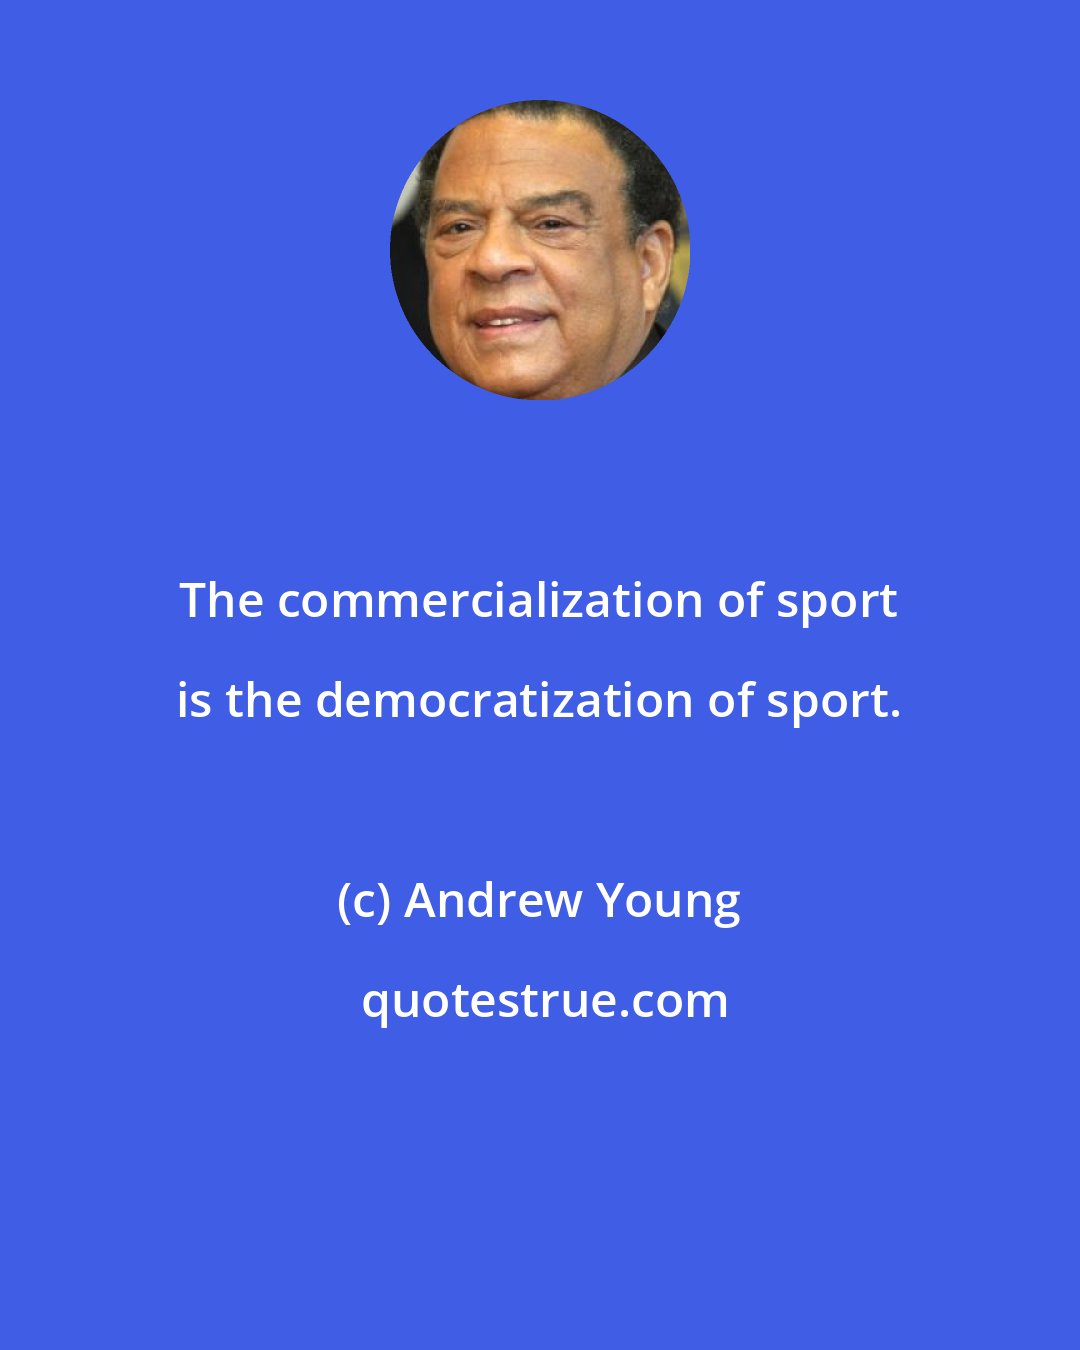 Andrew Young: The commercialization of sport is the democratization of sport.